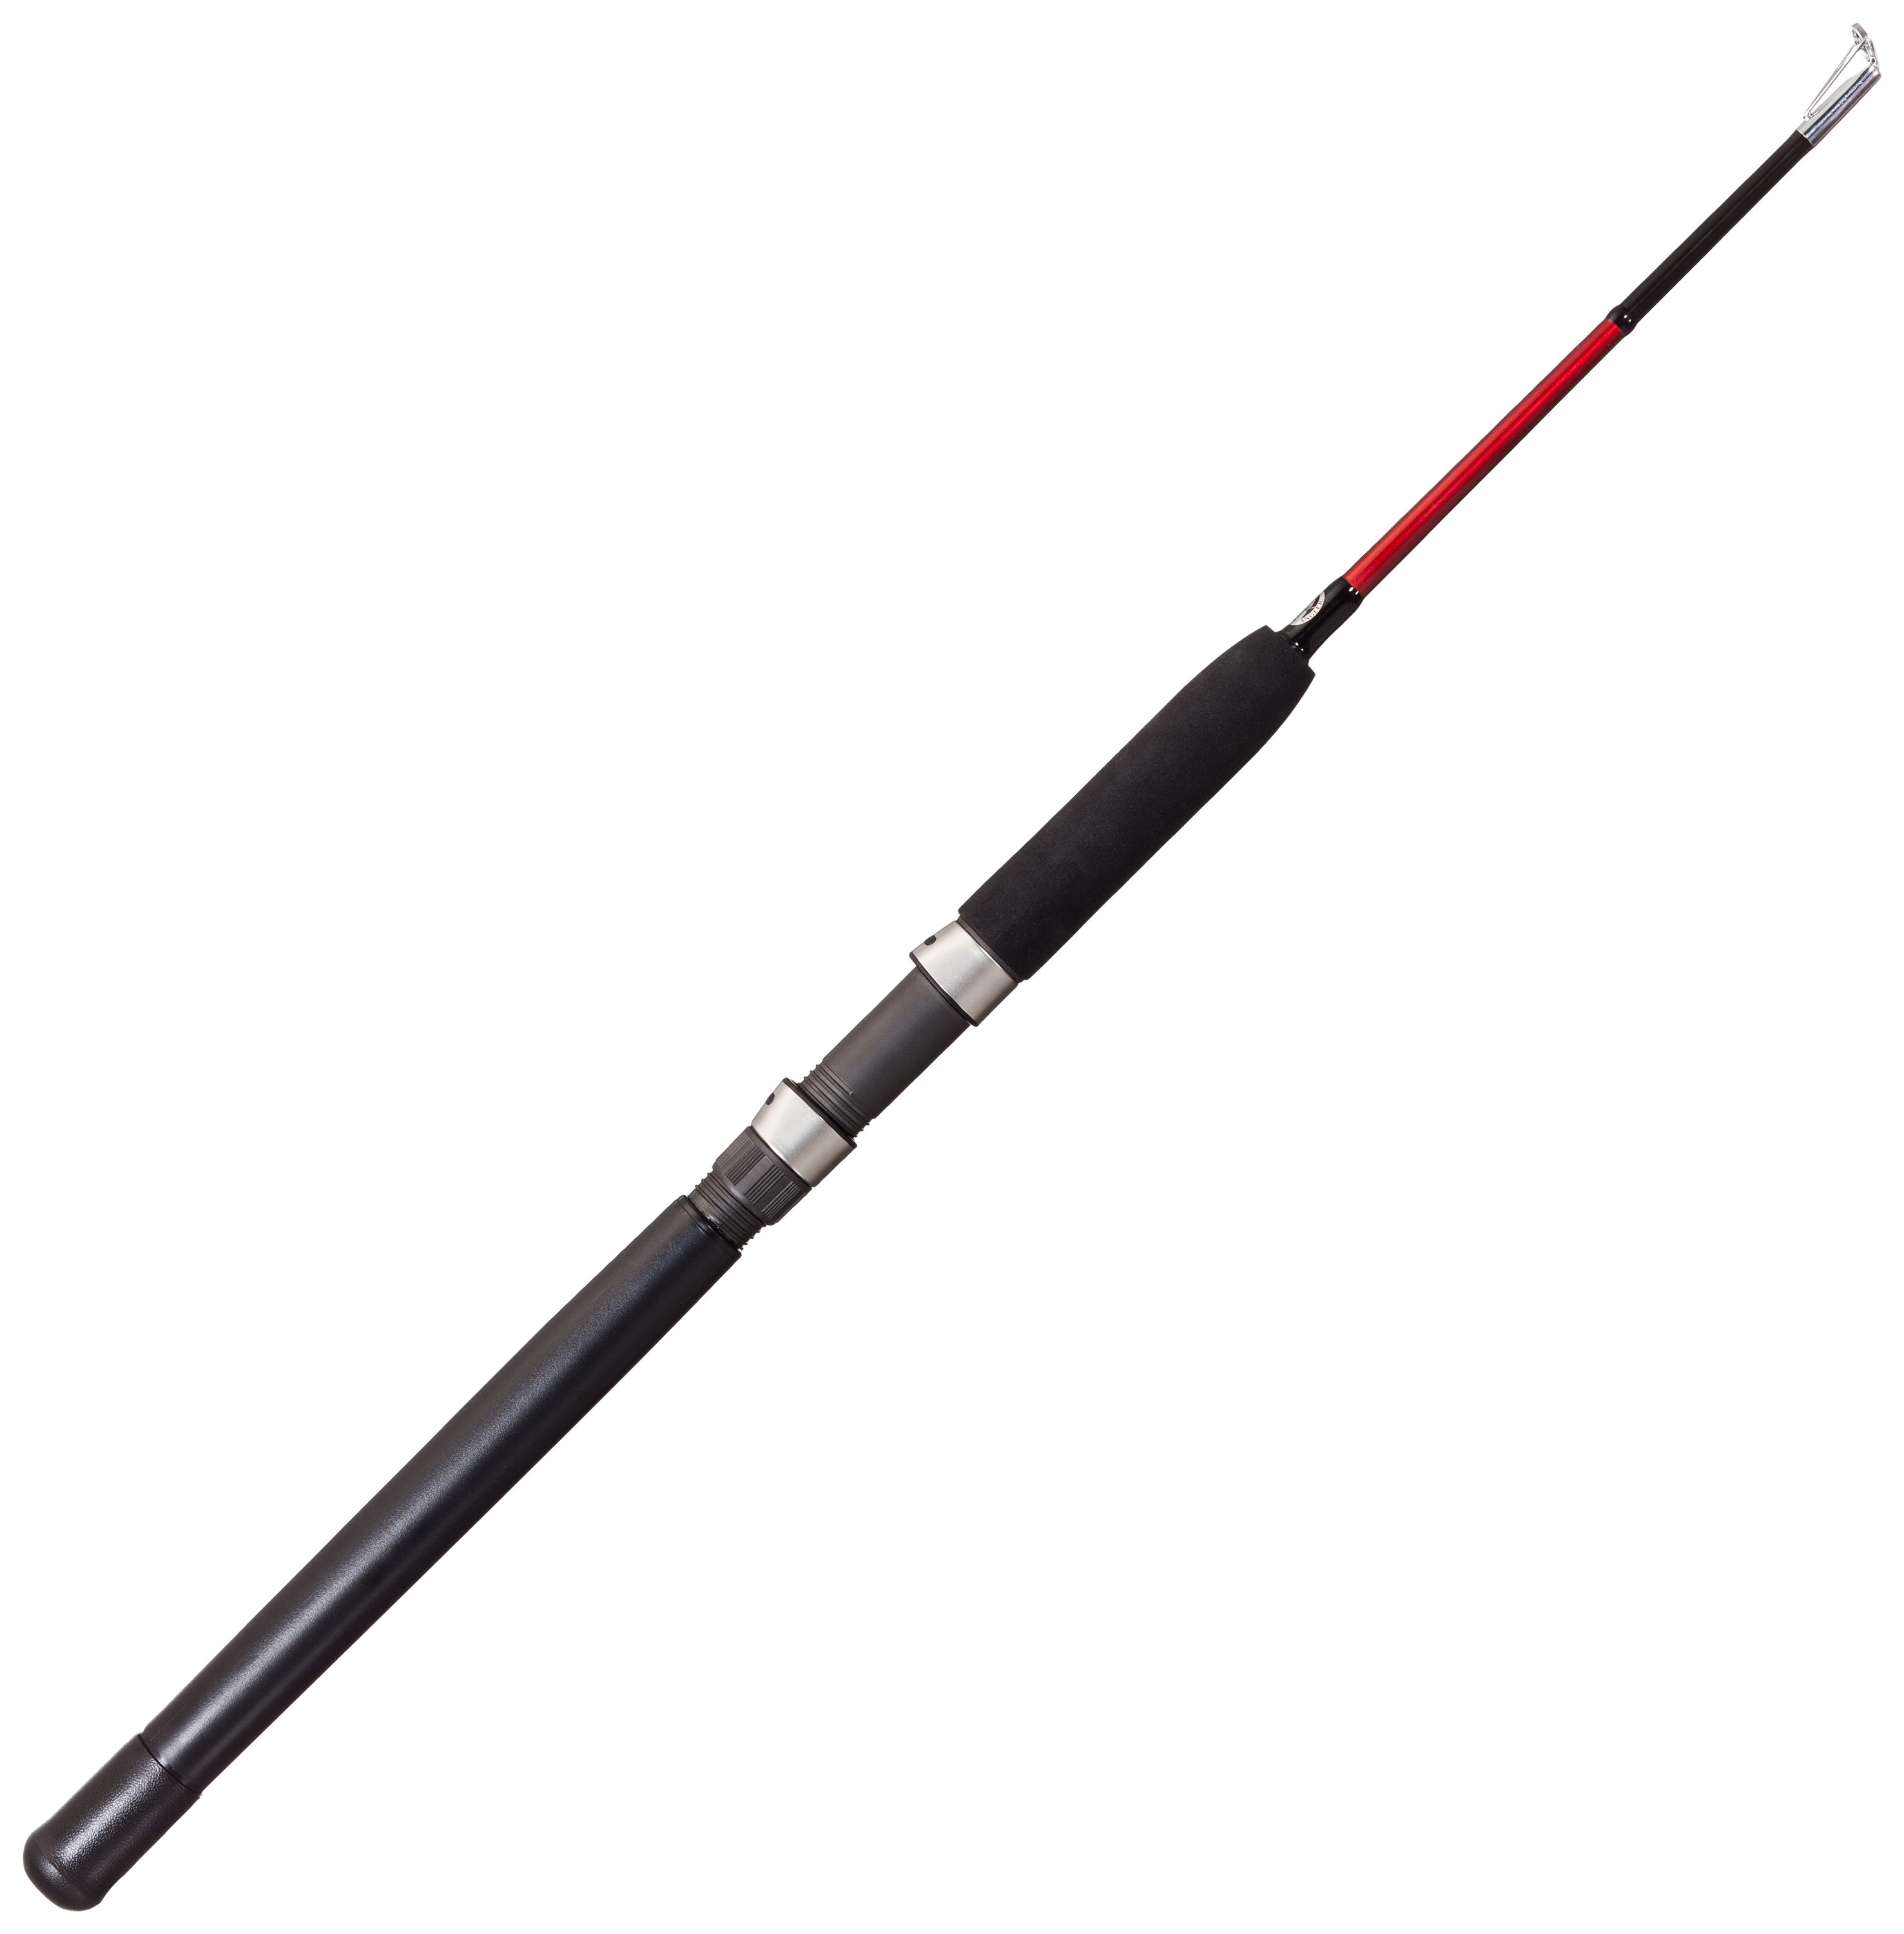 POWER PLUS TROPHY CLASS 9' SURF SPIN FISHING ROD - sporting goods